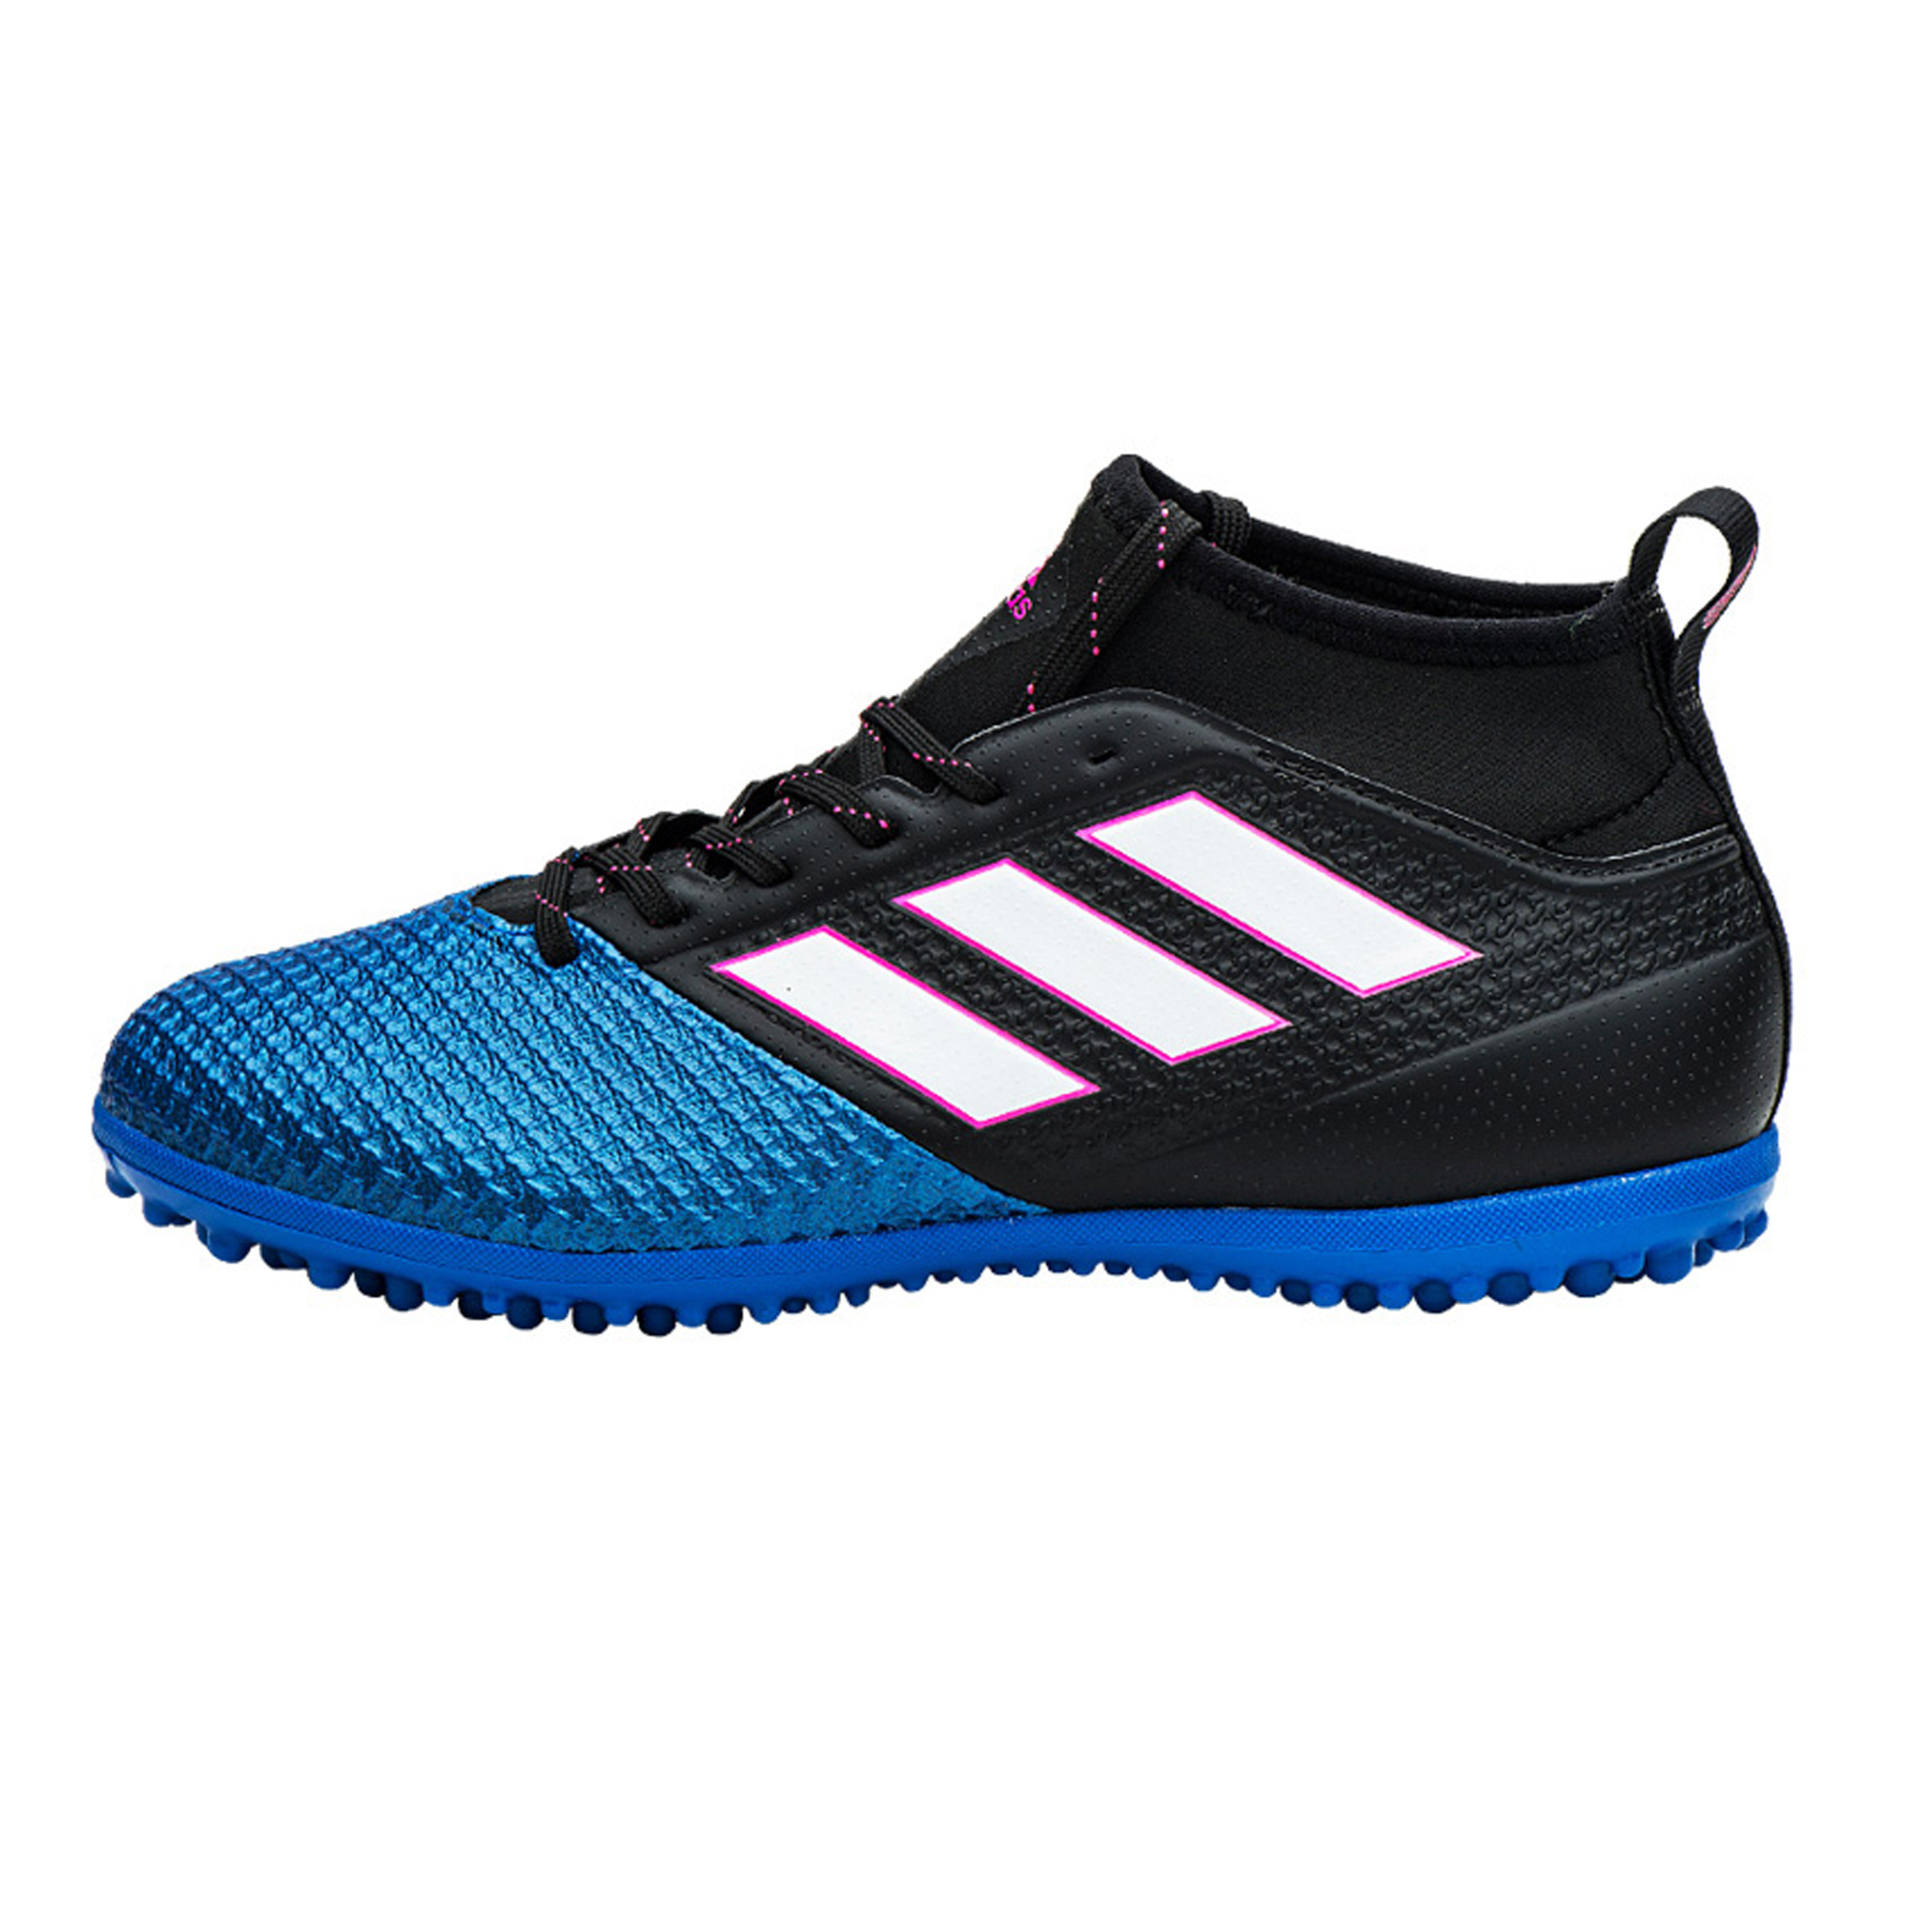 adidas ace 17.3 bianche